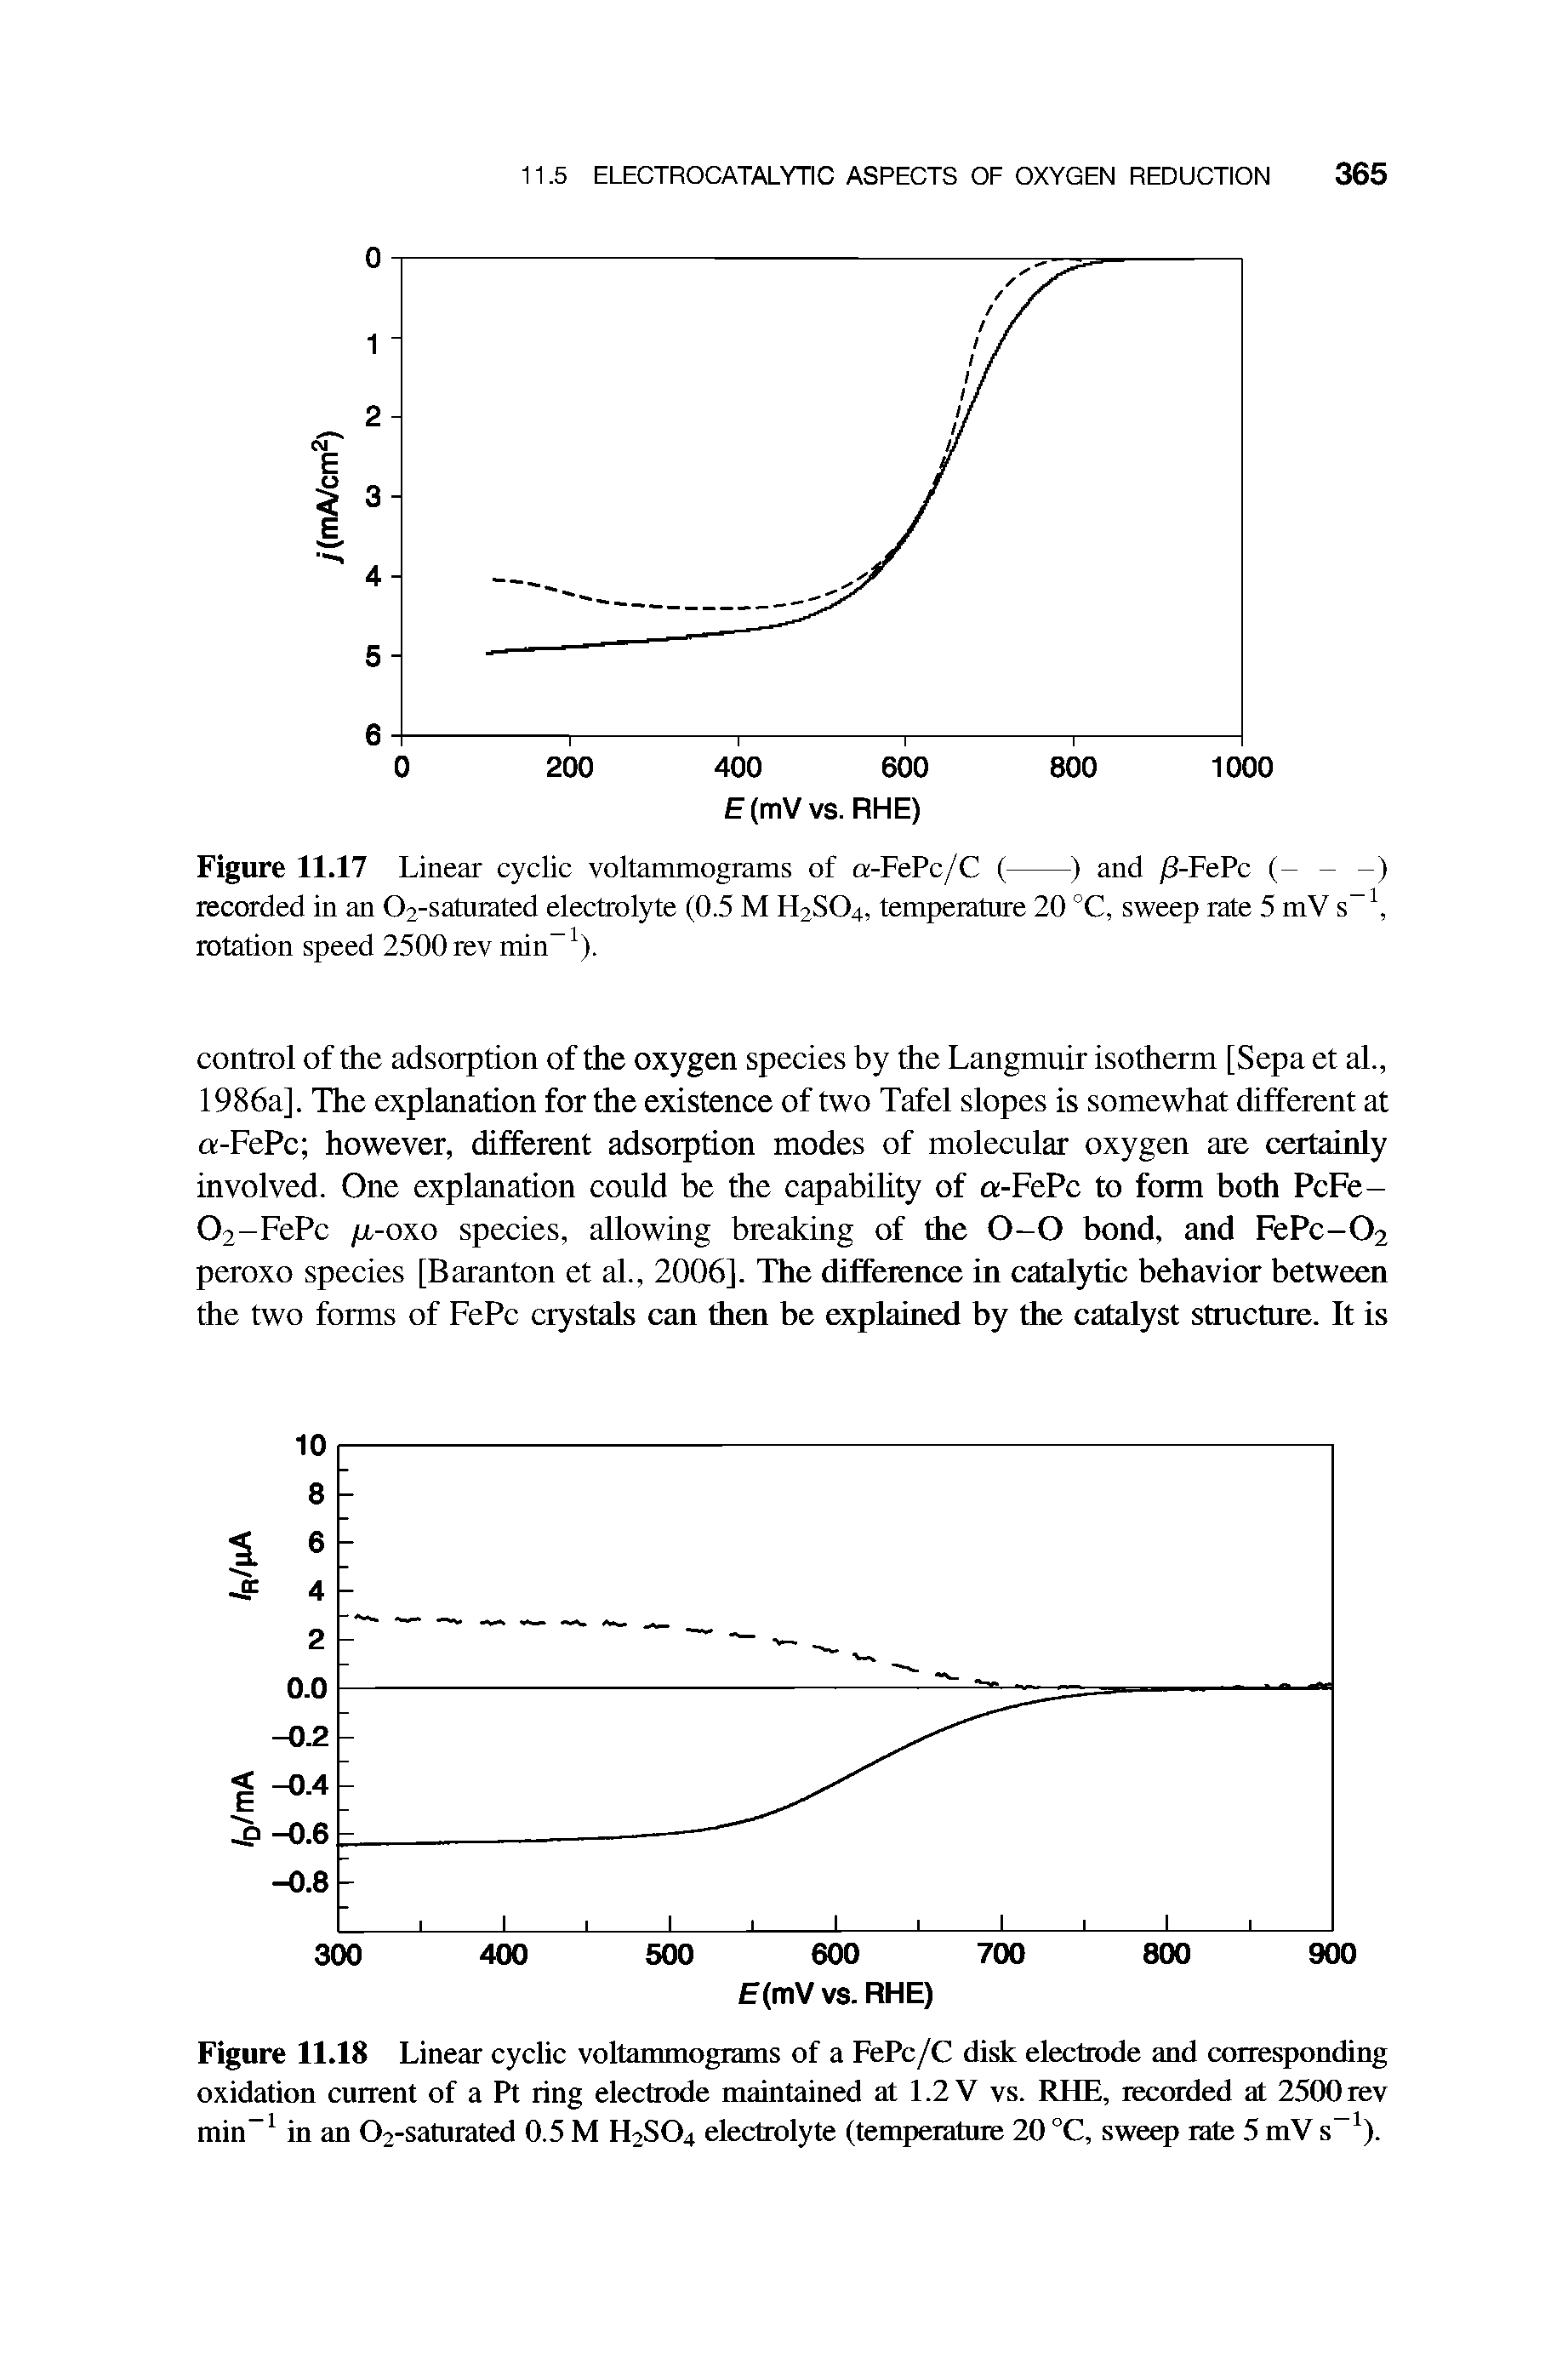 Figure 11.18 Linear cyclic voltammograms of a FePc/C disk electrode and corresponding oxidation current of a Pt ring electrode maintained at 1.2 V vs. RHE, recorded at 2500 rev min in an 02-saturated 0.5 M H2SO4 electrolyte (temperature 20 °C, sweep rate 5 mV s ).